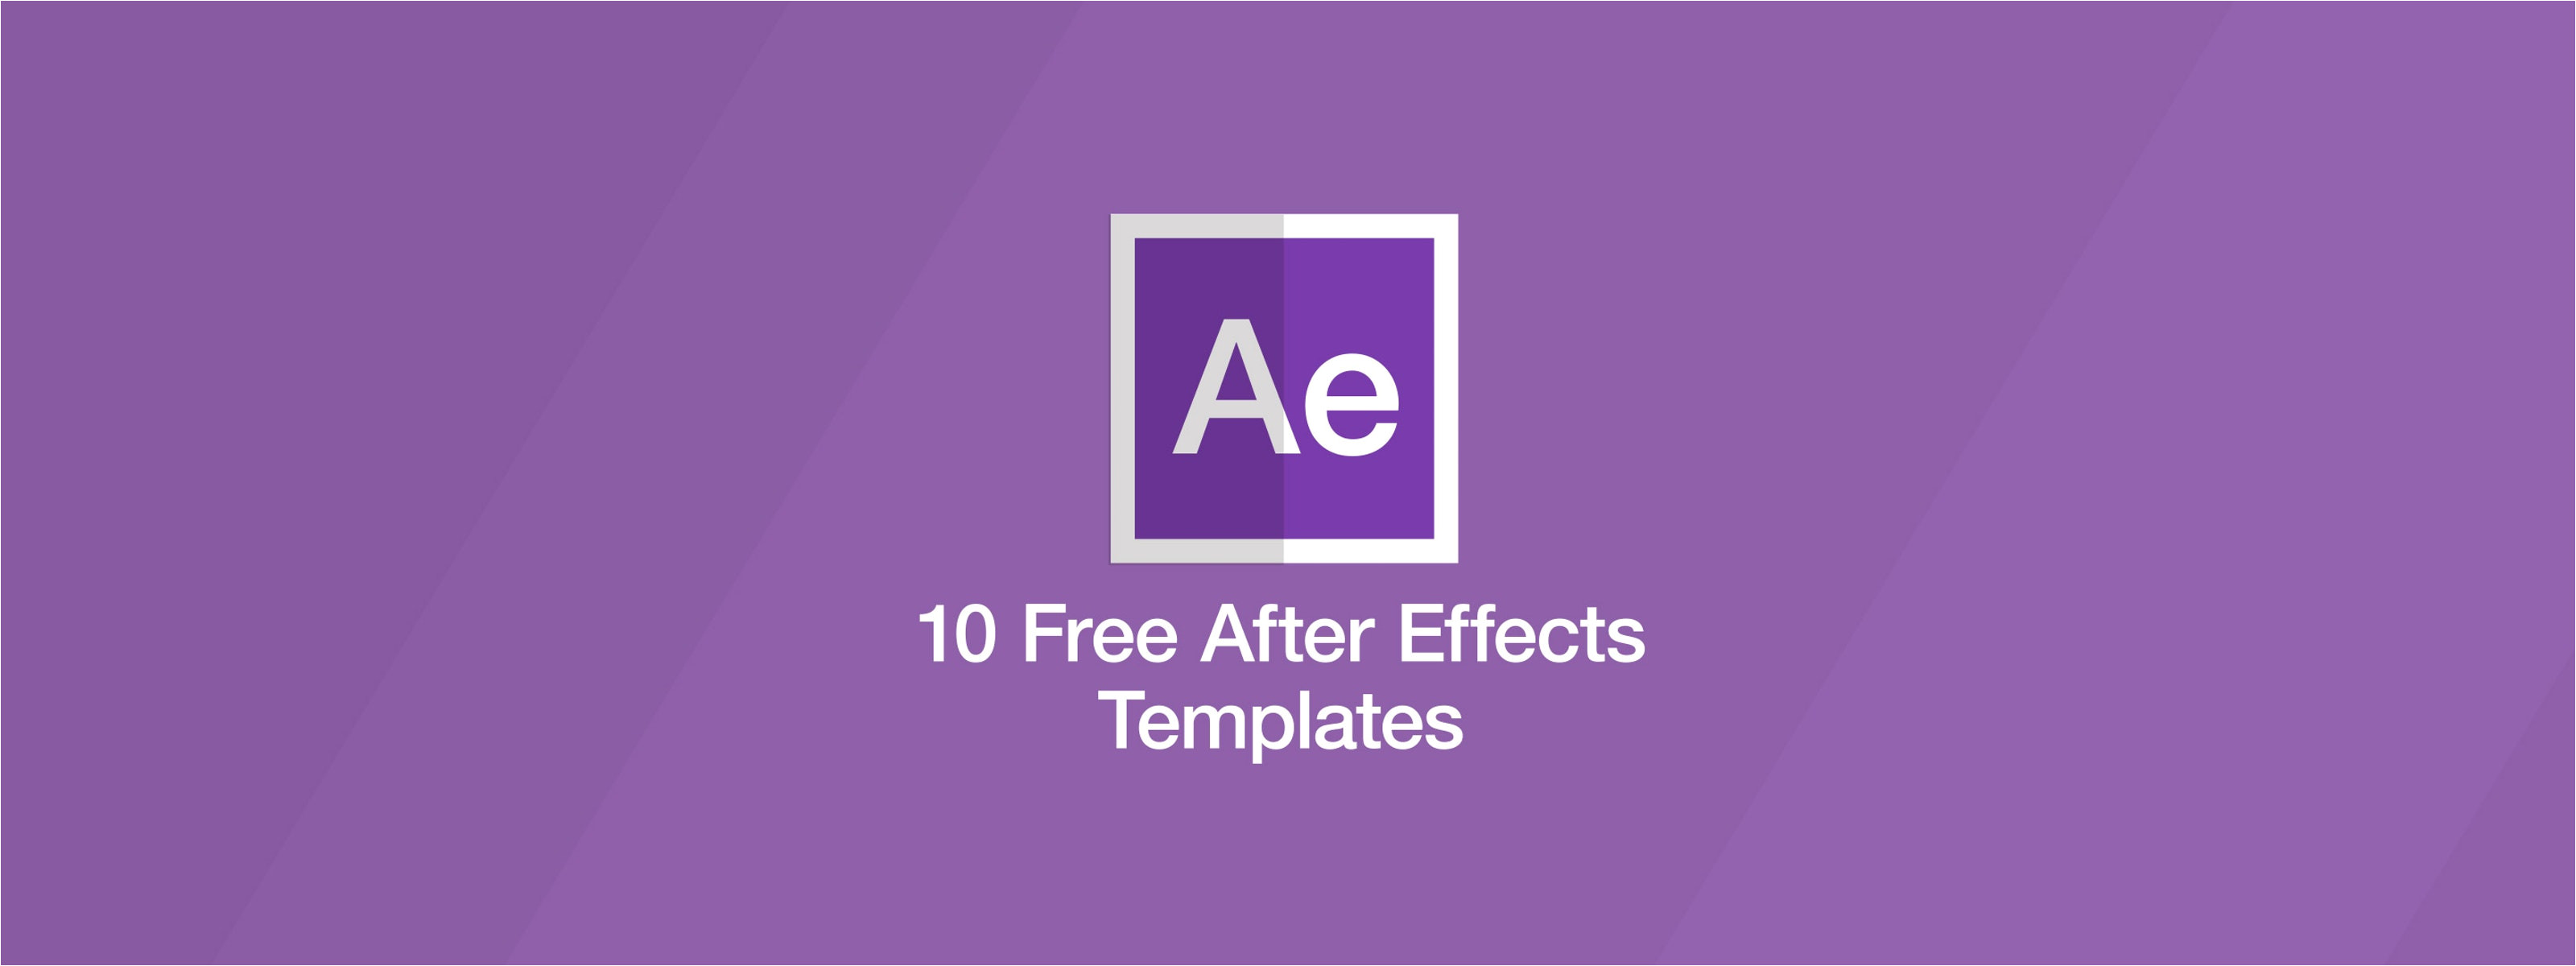 10 free after effects templates